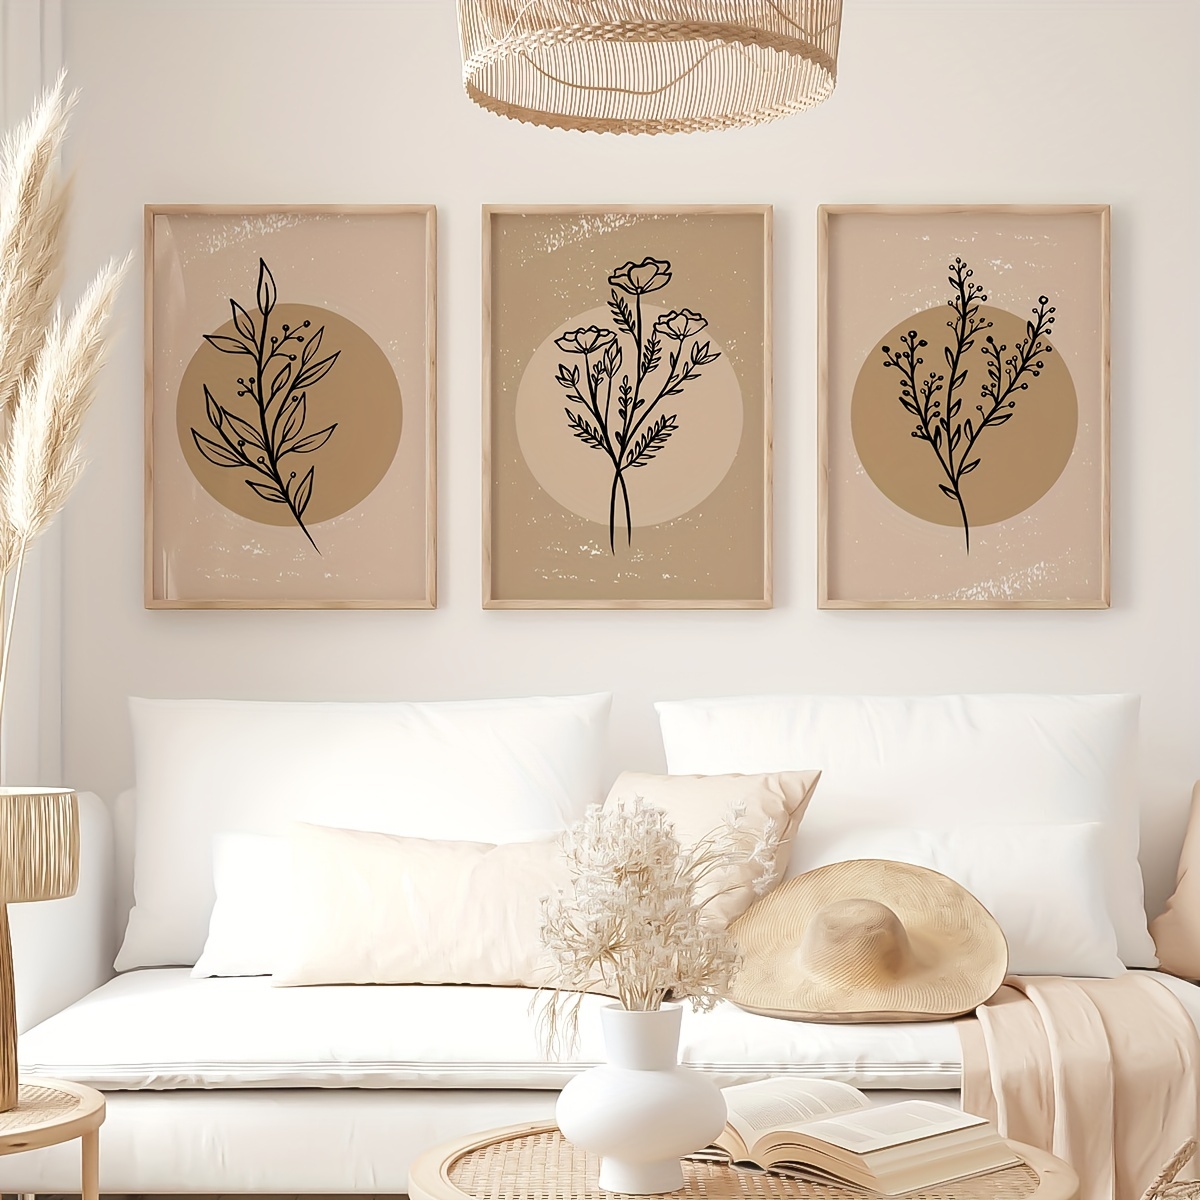  Mid Century Modern Boho Wall Art Beige Abstract Canvas Painting  Abstract Plant Pictures for Living Room Decor Abstract Boho Wall Art Prints  Minimalist Geometric Sun Canvas Print 16x24inch No Frame: Posters